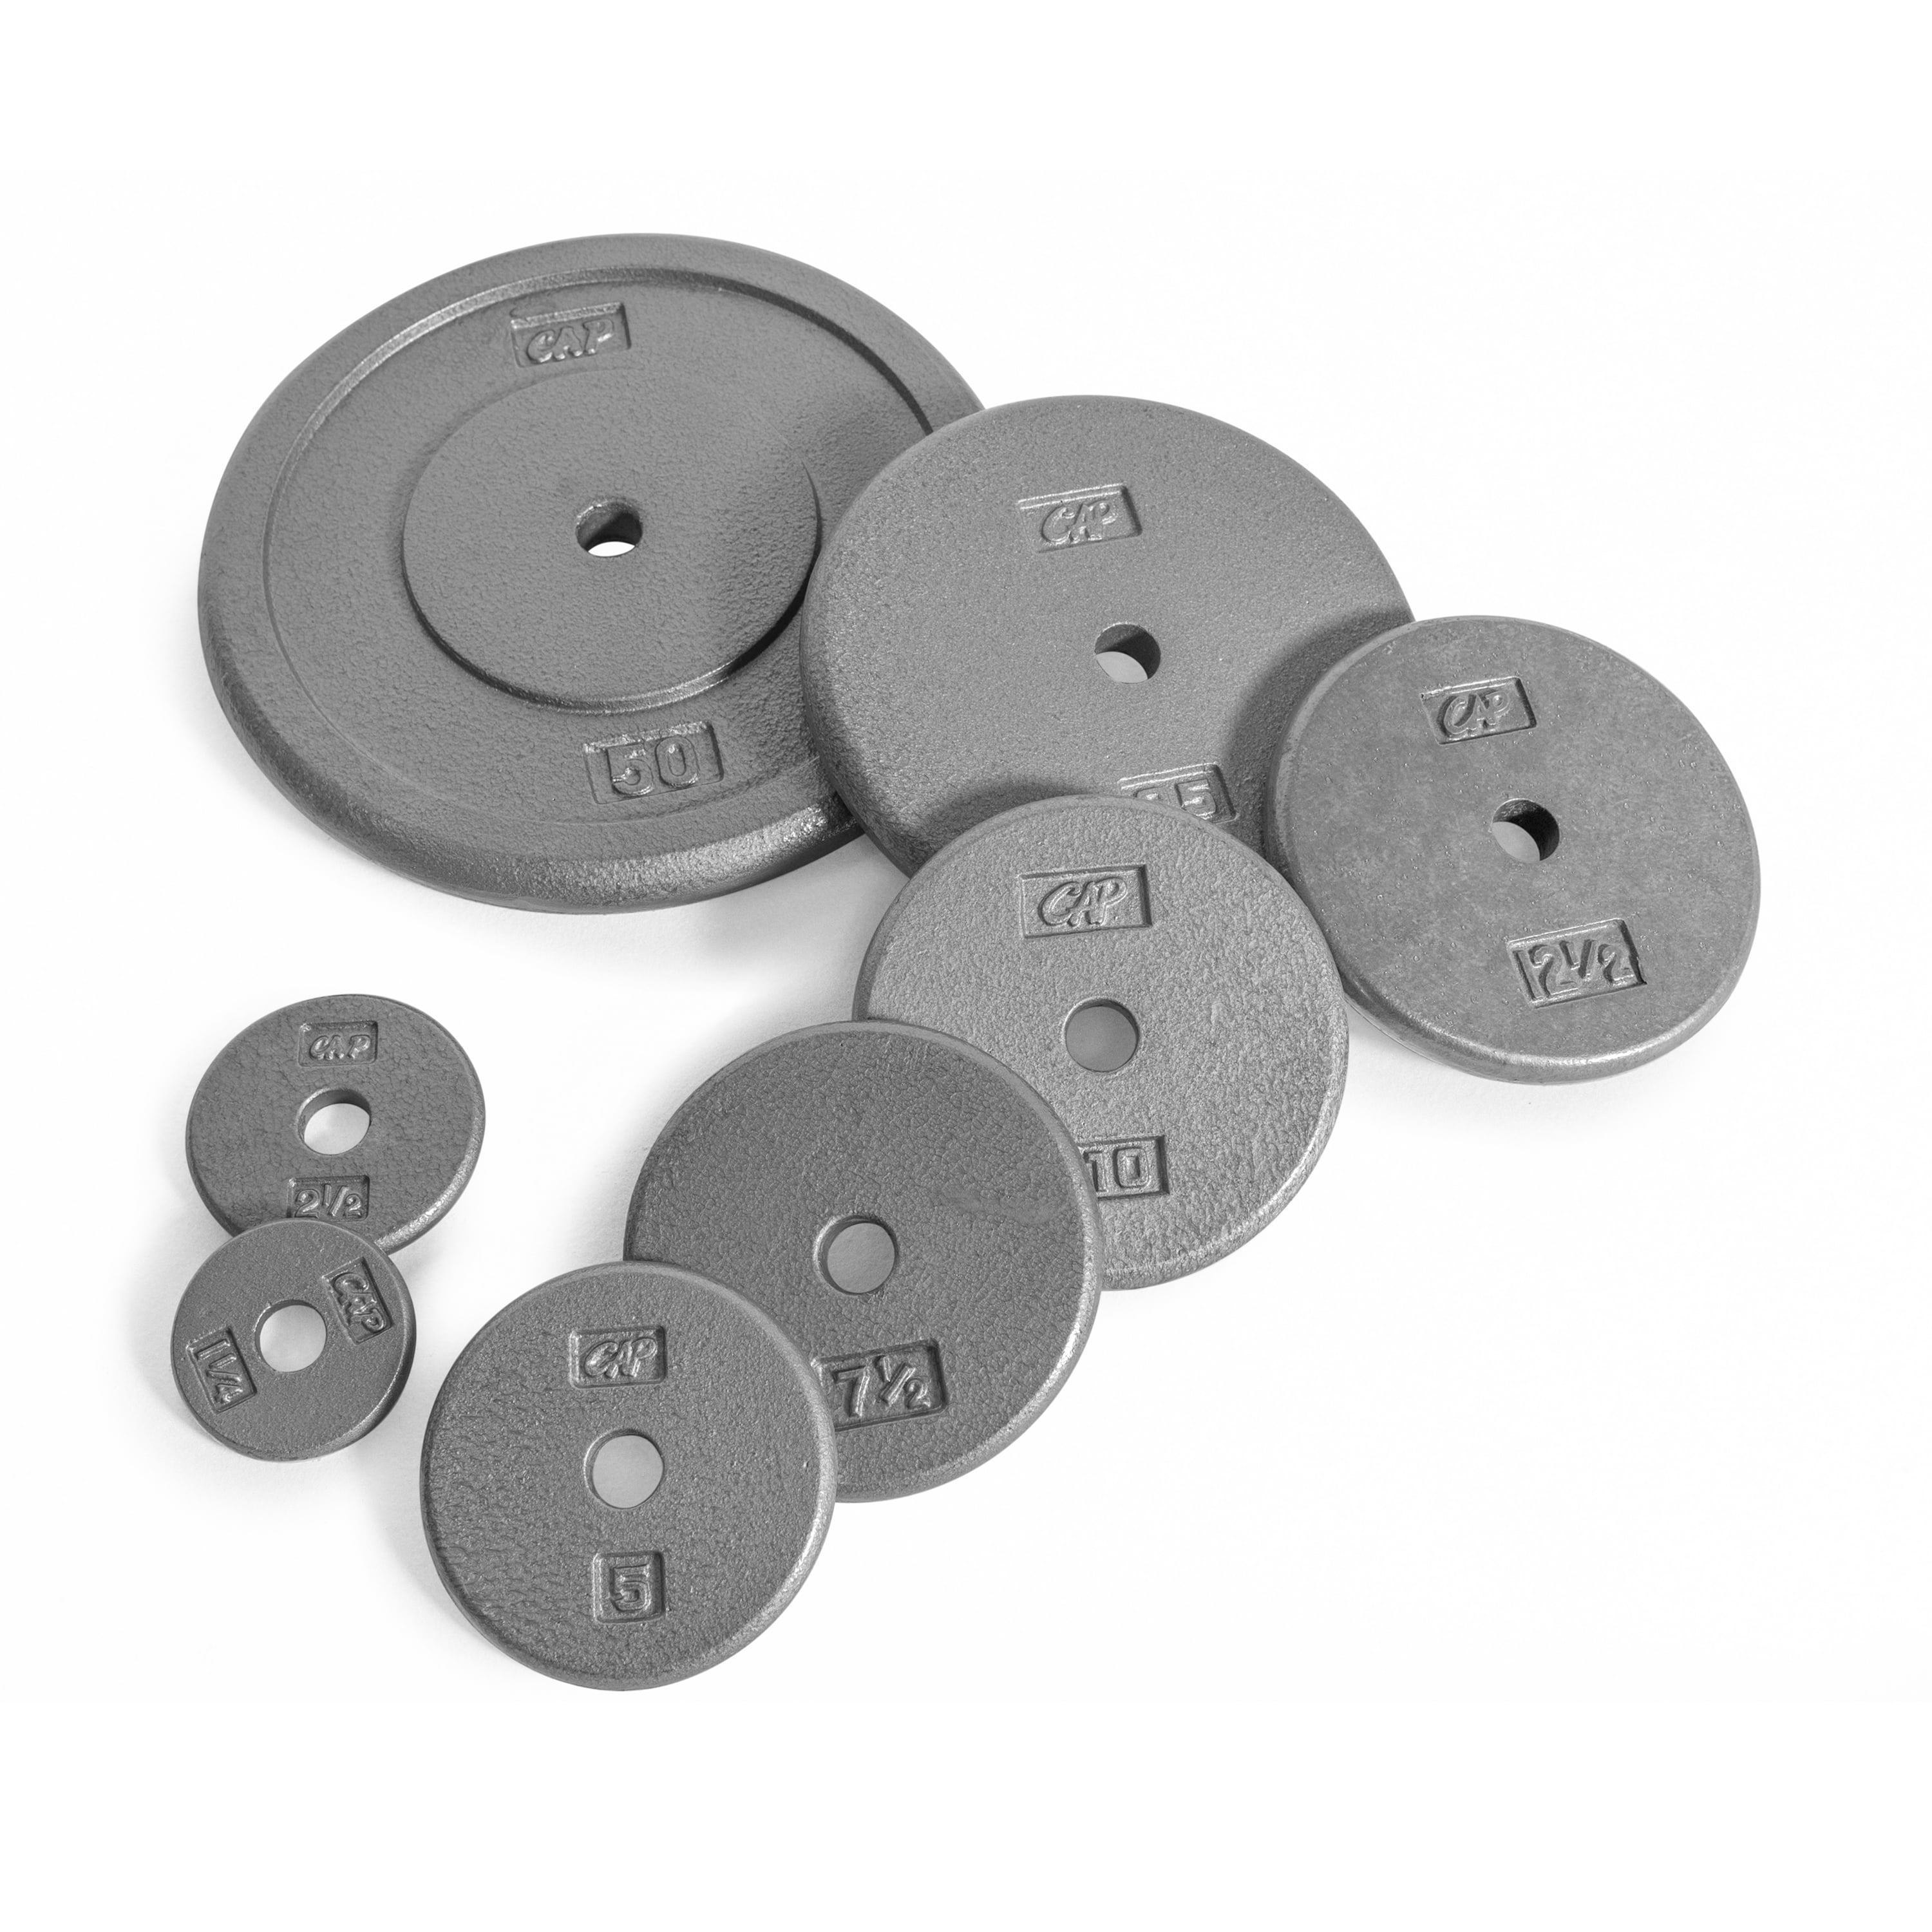 CAPHAUS Grey Standard Solid Cast Iron Weight Plates 1-inch Center Hole for Standard Barbell & Dumbbell Handles in 1.25/2.5/5/7.5/10/12.5/25 & 50 LB Multiple Options 